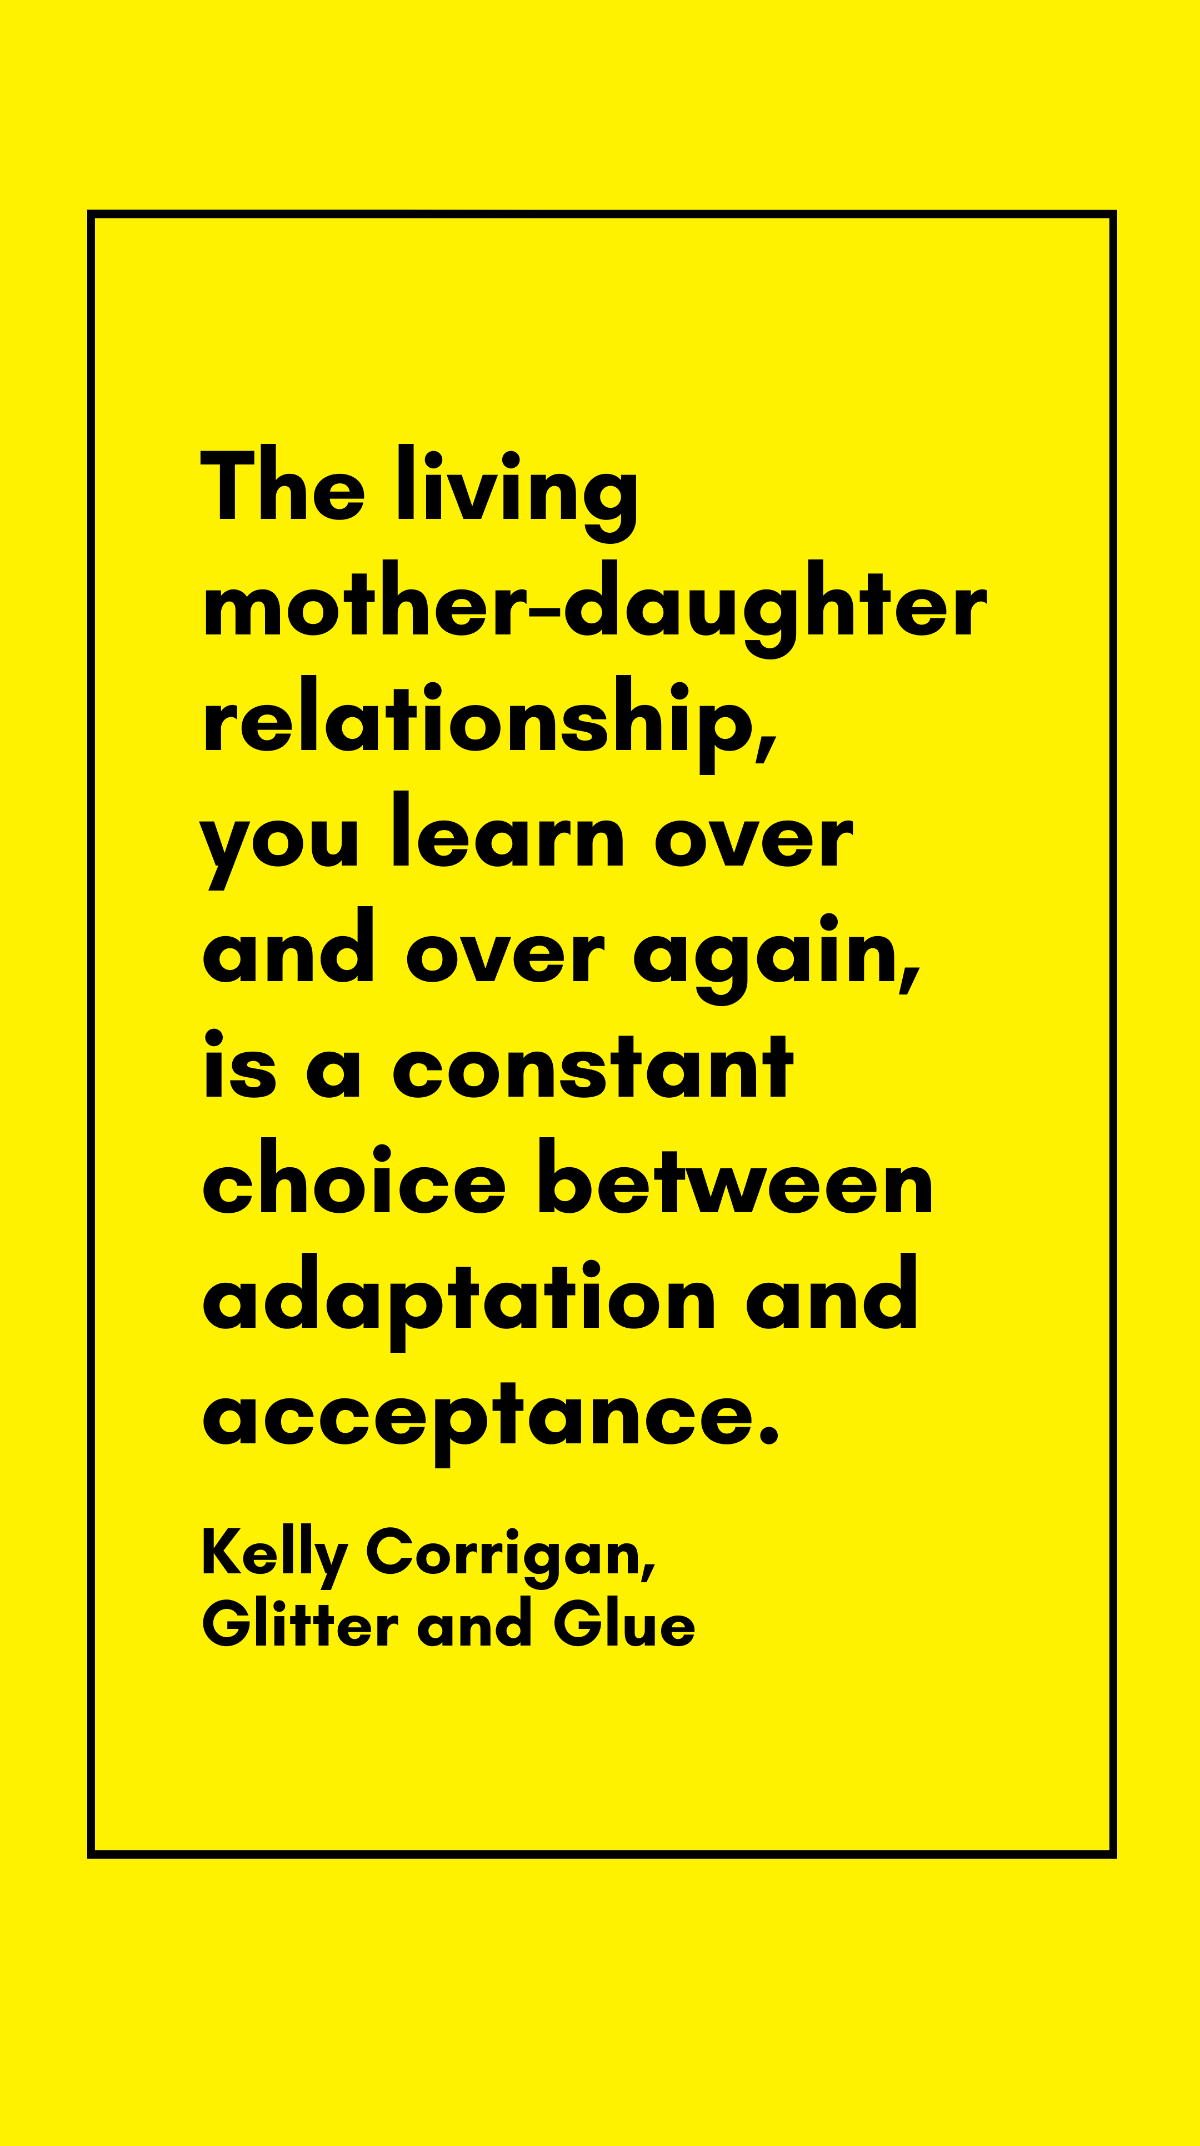 Kelly Corrigan, Glitter and Glue - The living mother-daughter relationship, you learn over and over again, is a constant choice between adaptation and acceptance. Template